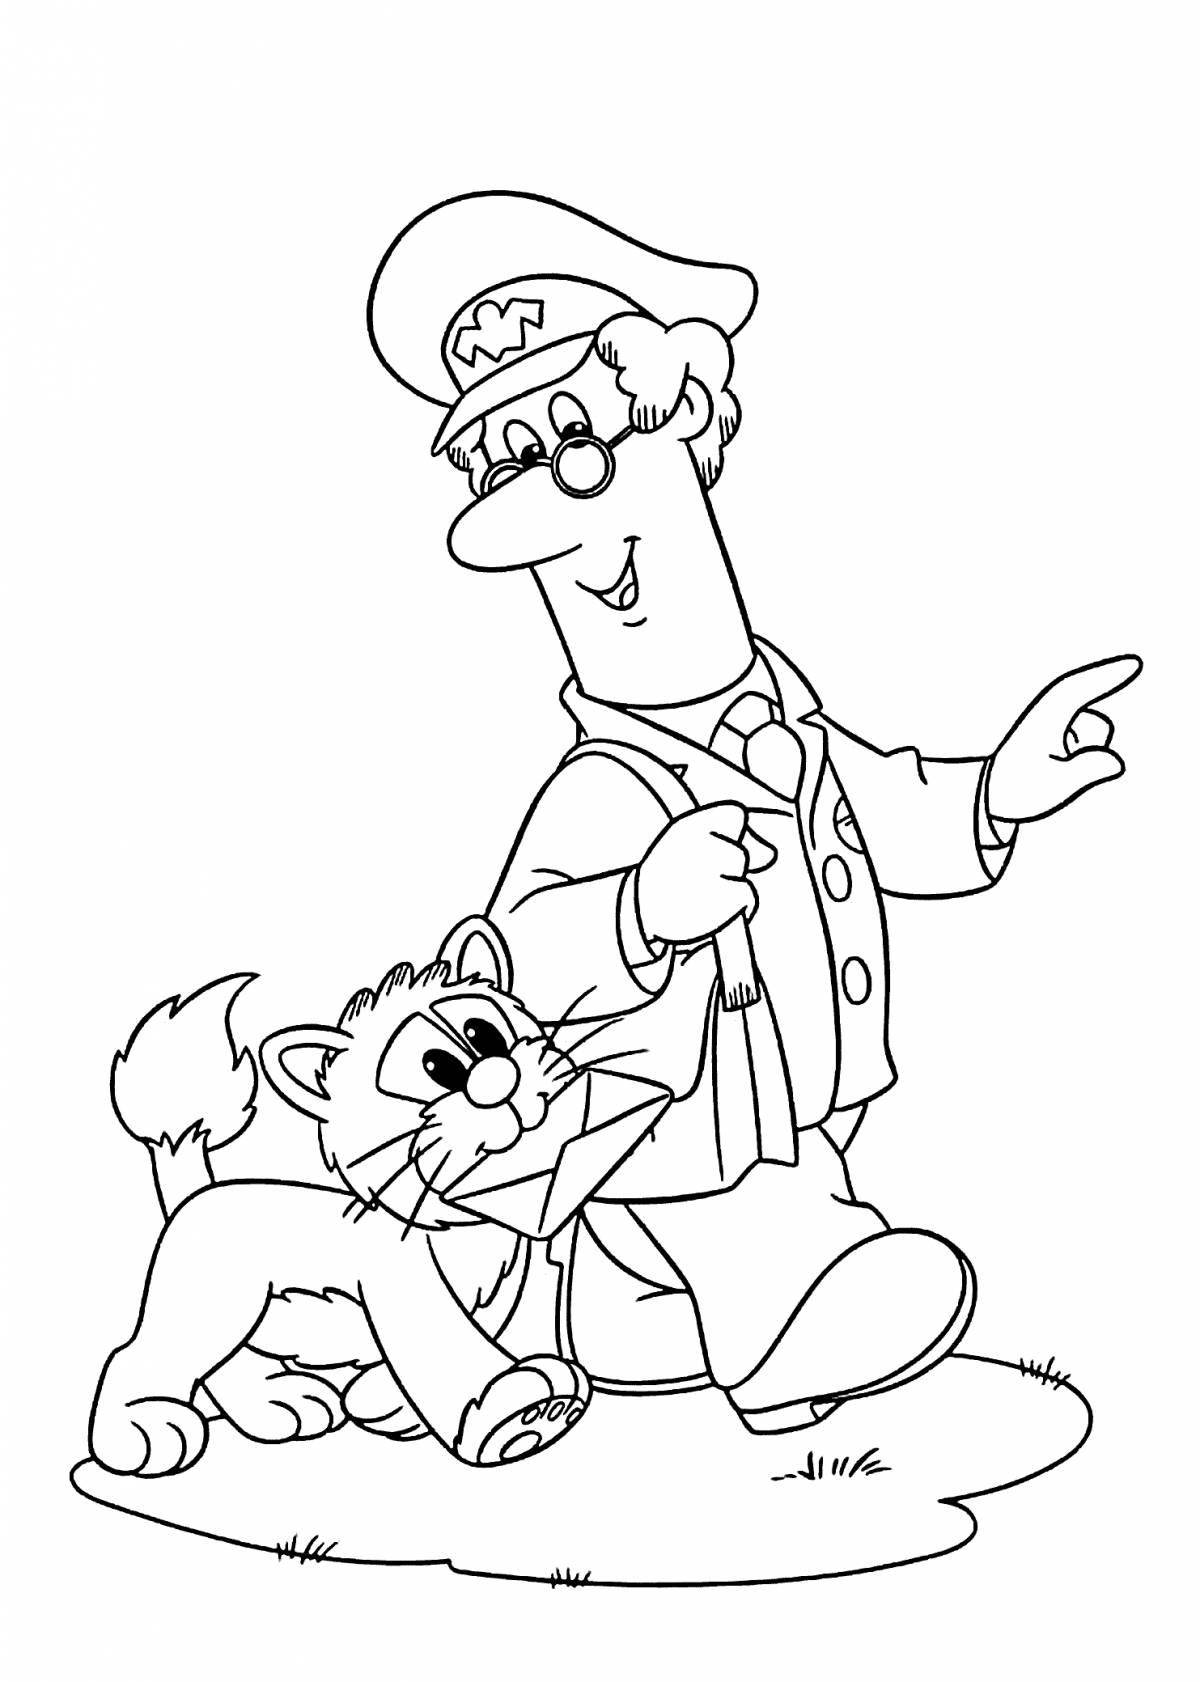 Animated postman coloring page